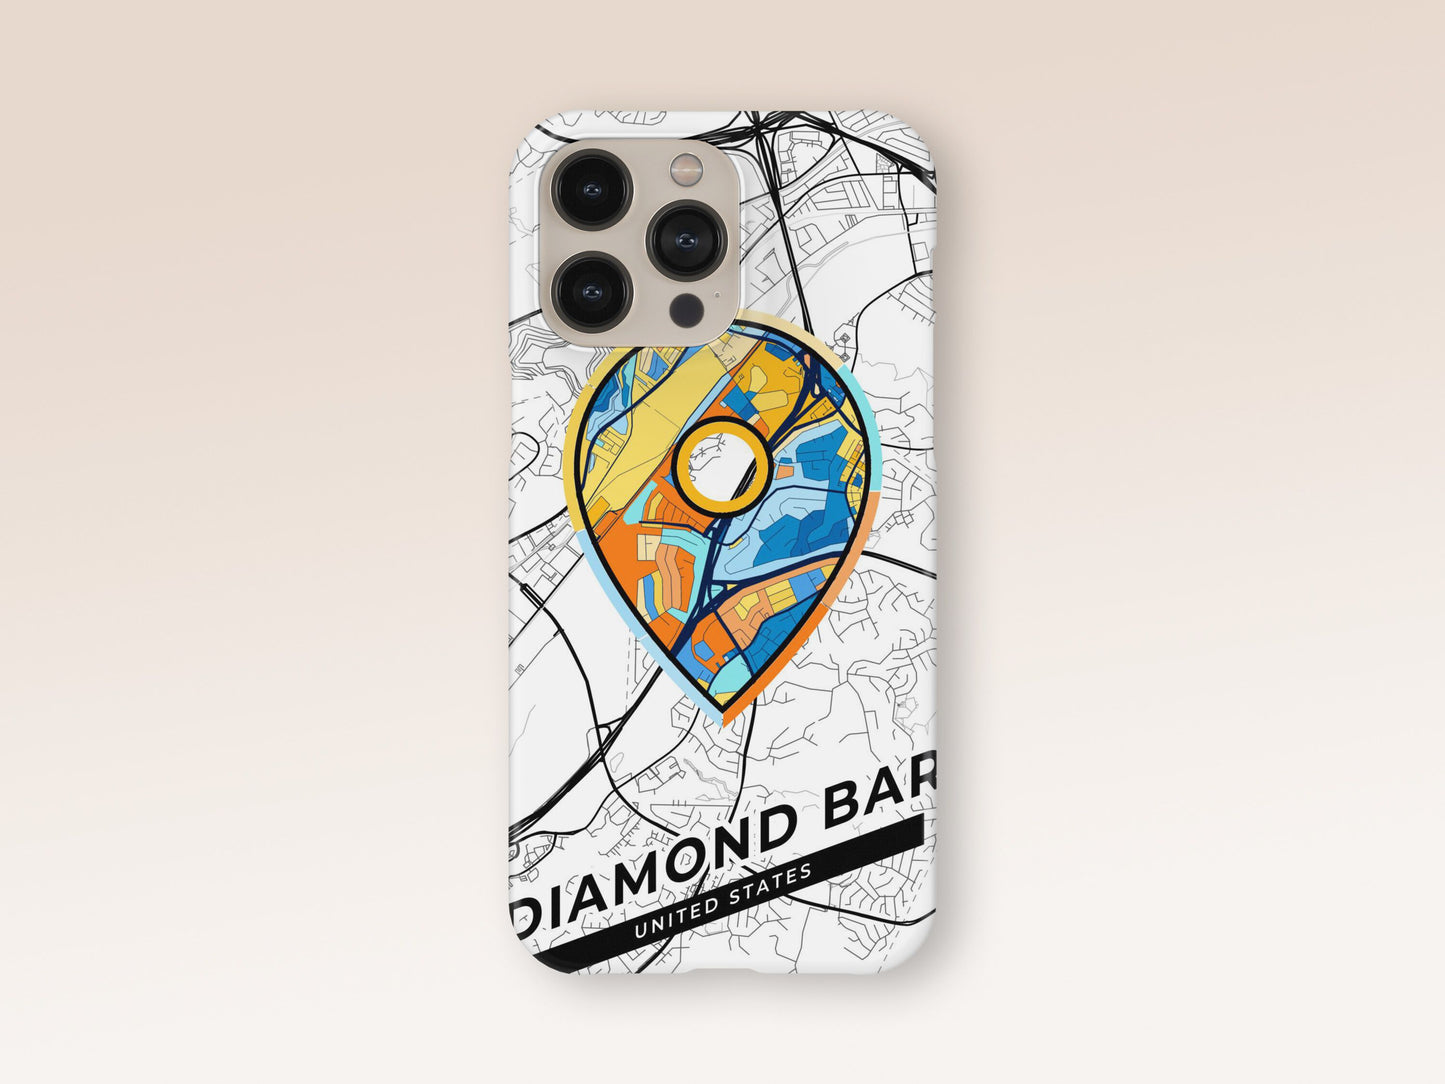 Diamond Bar California slim phone case with colorful icon. Birthday, wedding or housewarming gift. Couple match cases. 1